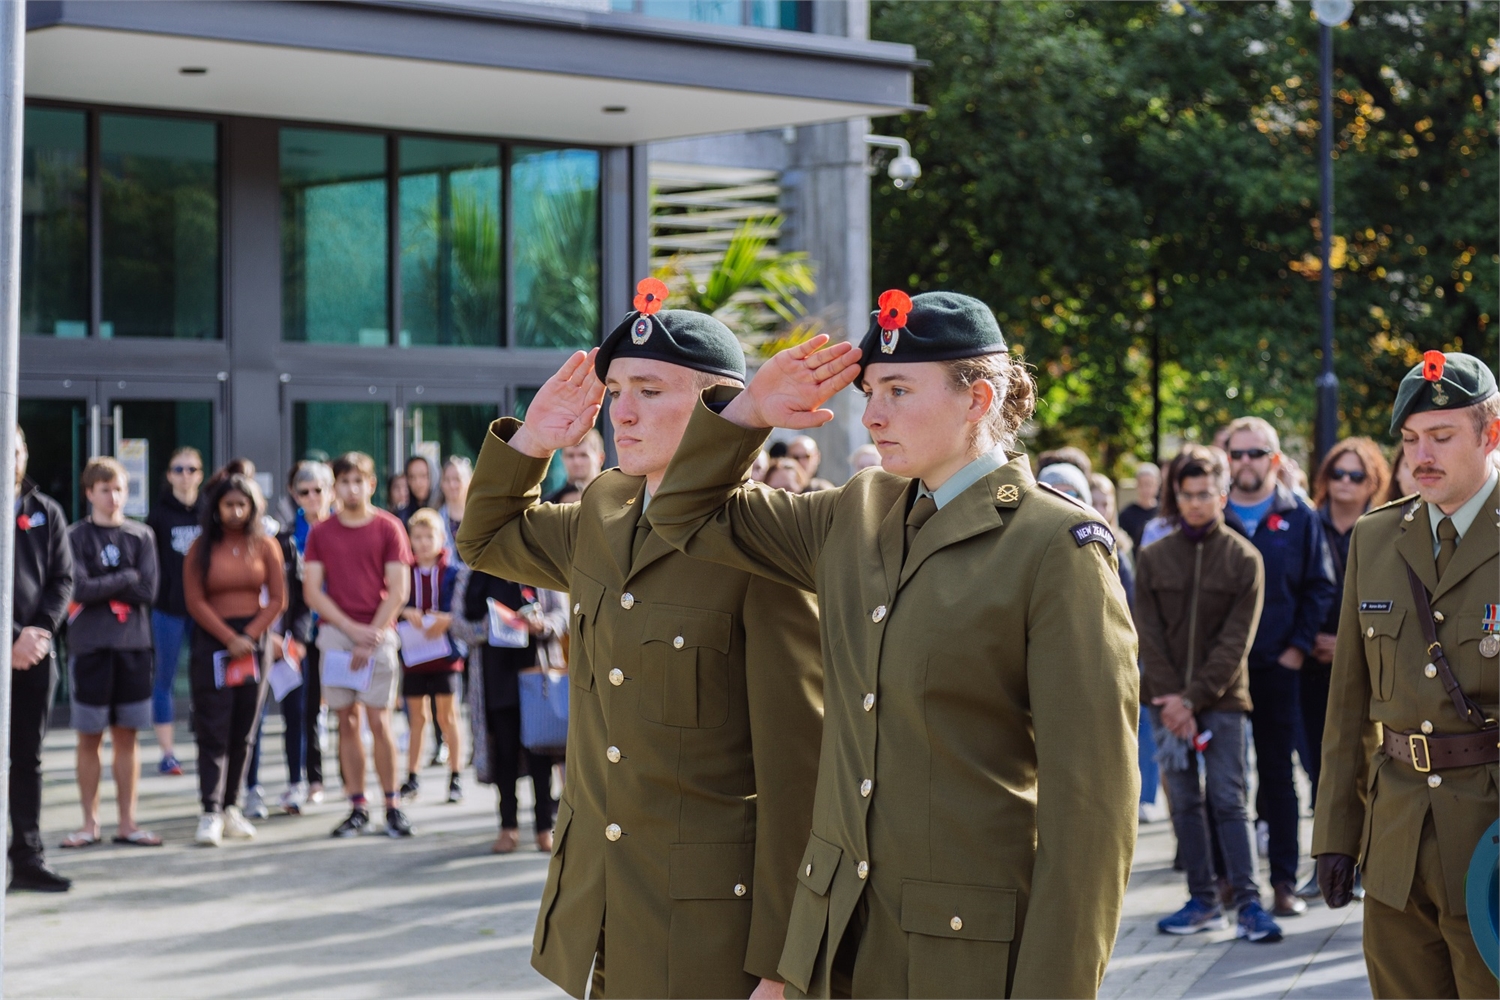 Each year, the UCSA hosts an ANZAC Day commemoration that brings together our community – staff, students, and the public – to honour those who have served. All are welcome to the service, which includes speeches, choir performances, and wreath laying, followed by tea and coffee.